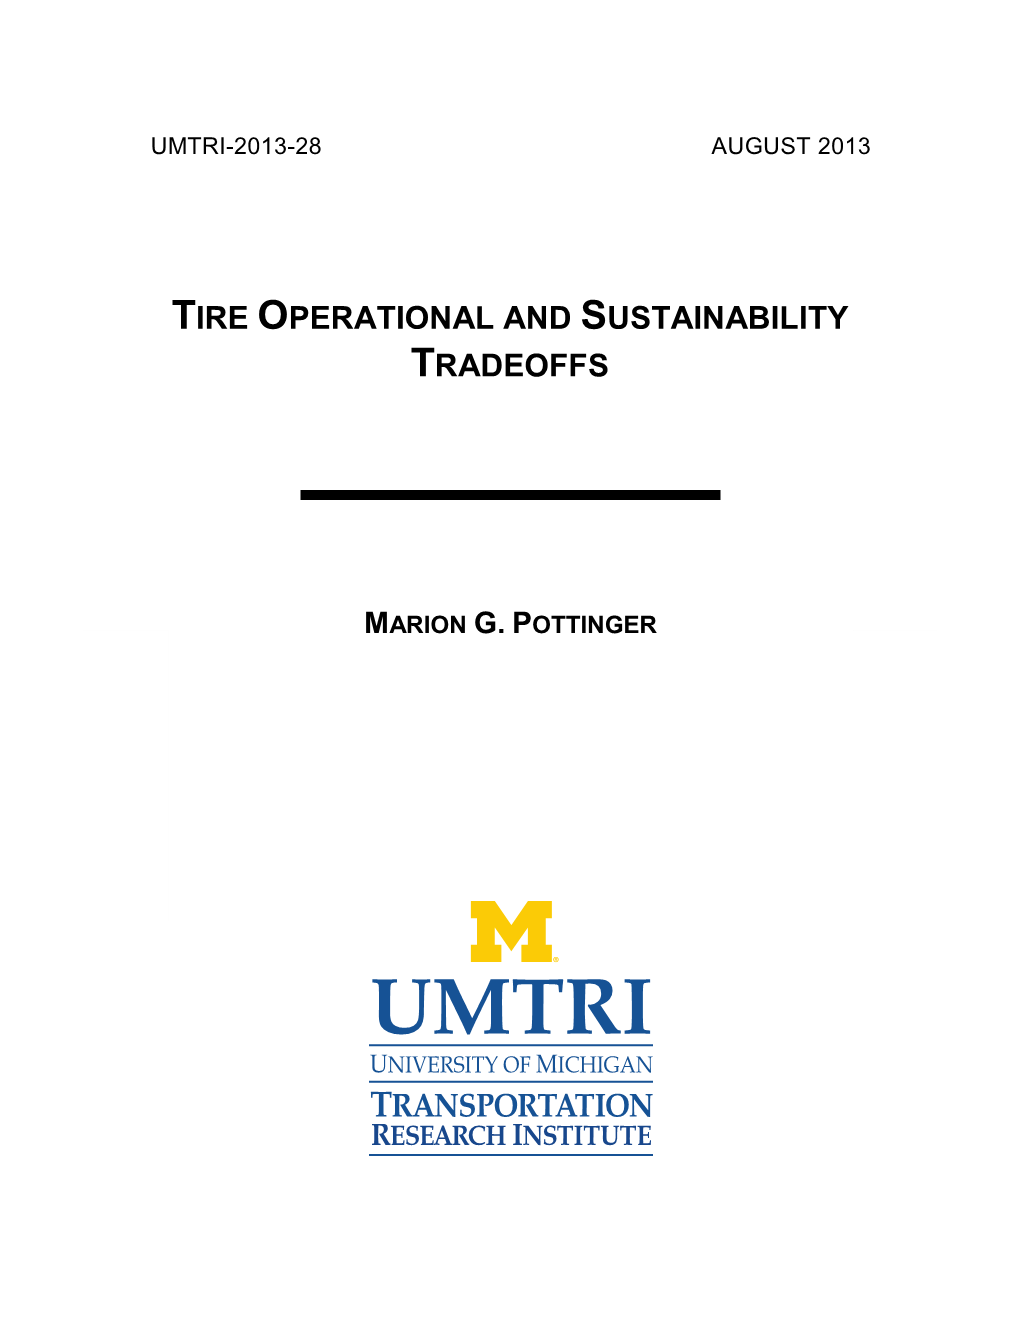 Tire Operational and Sustainability Tradeoffs